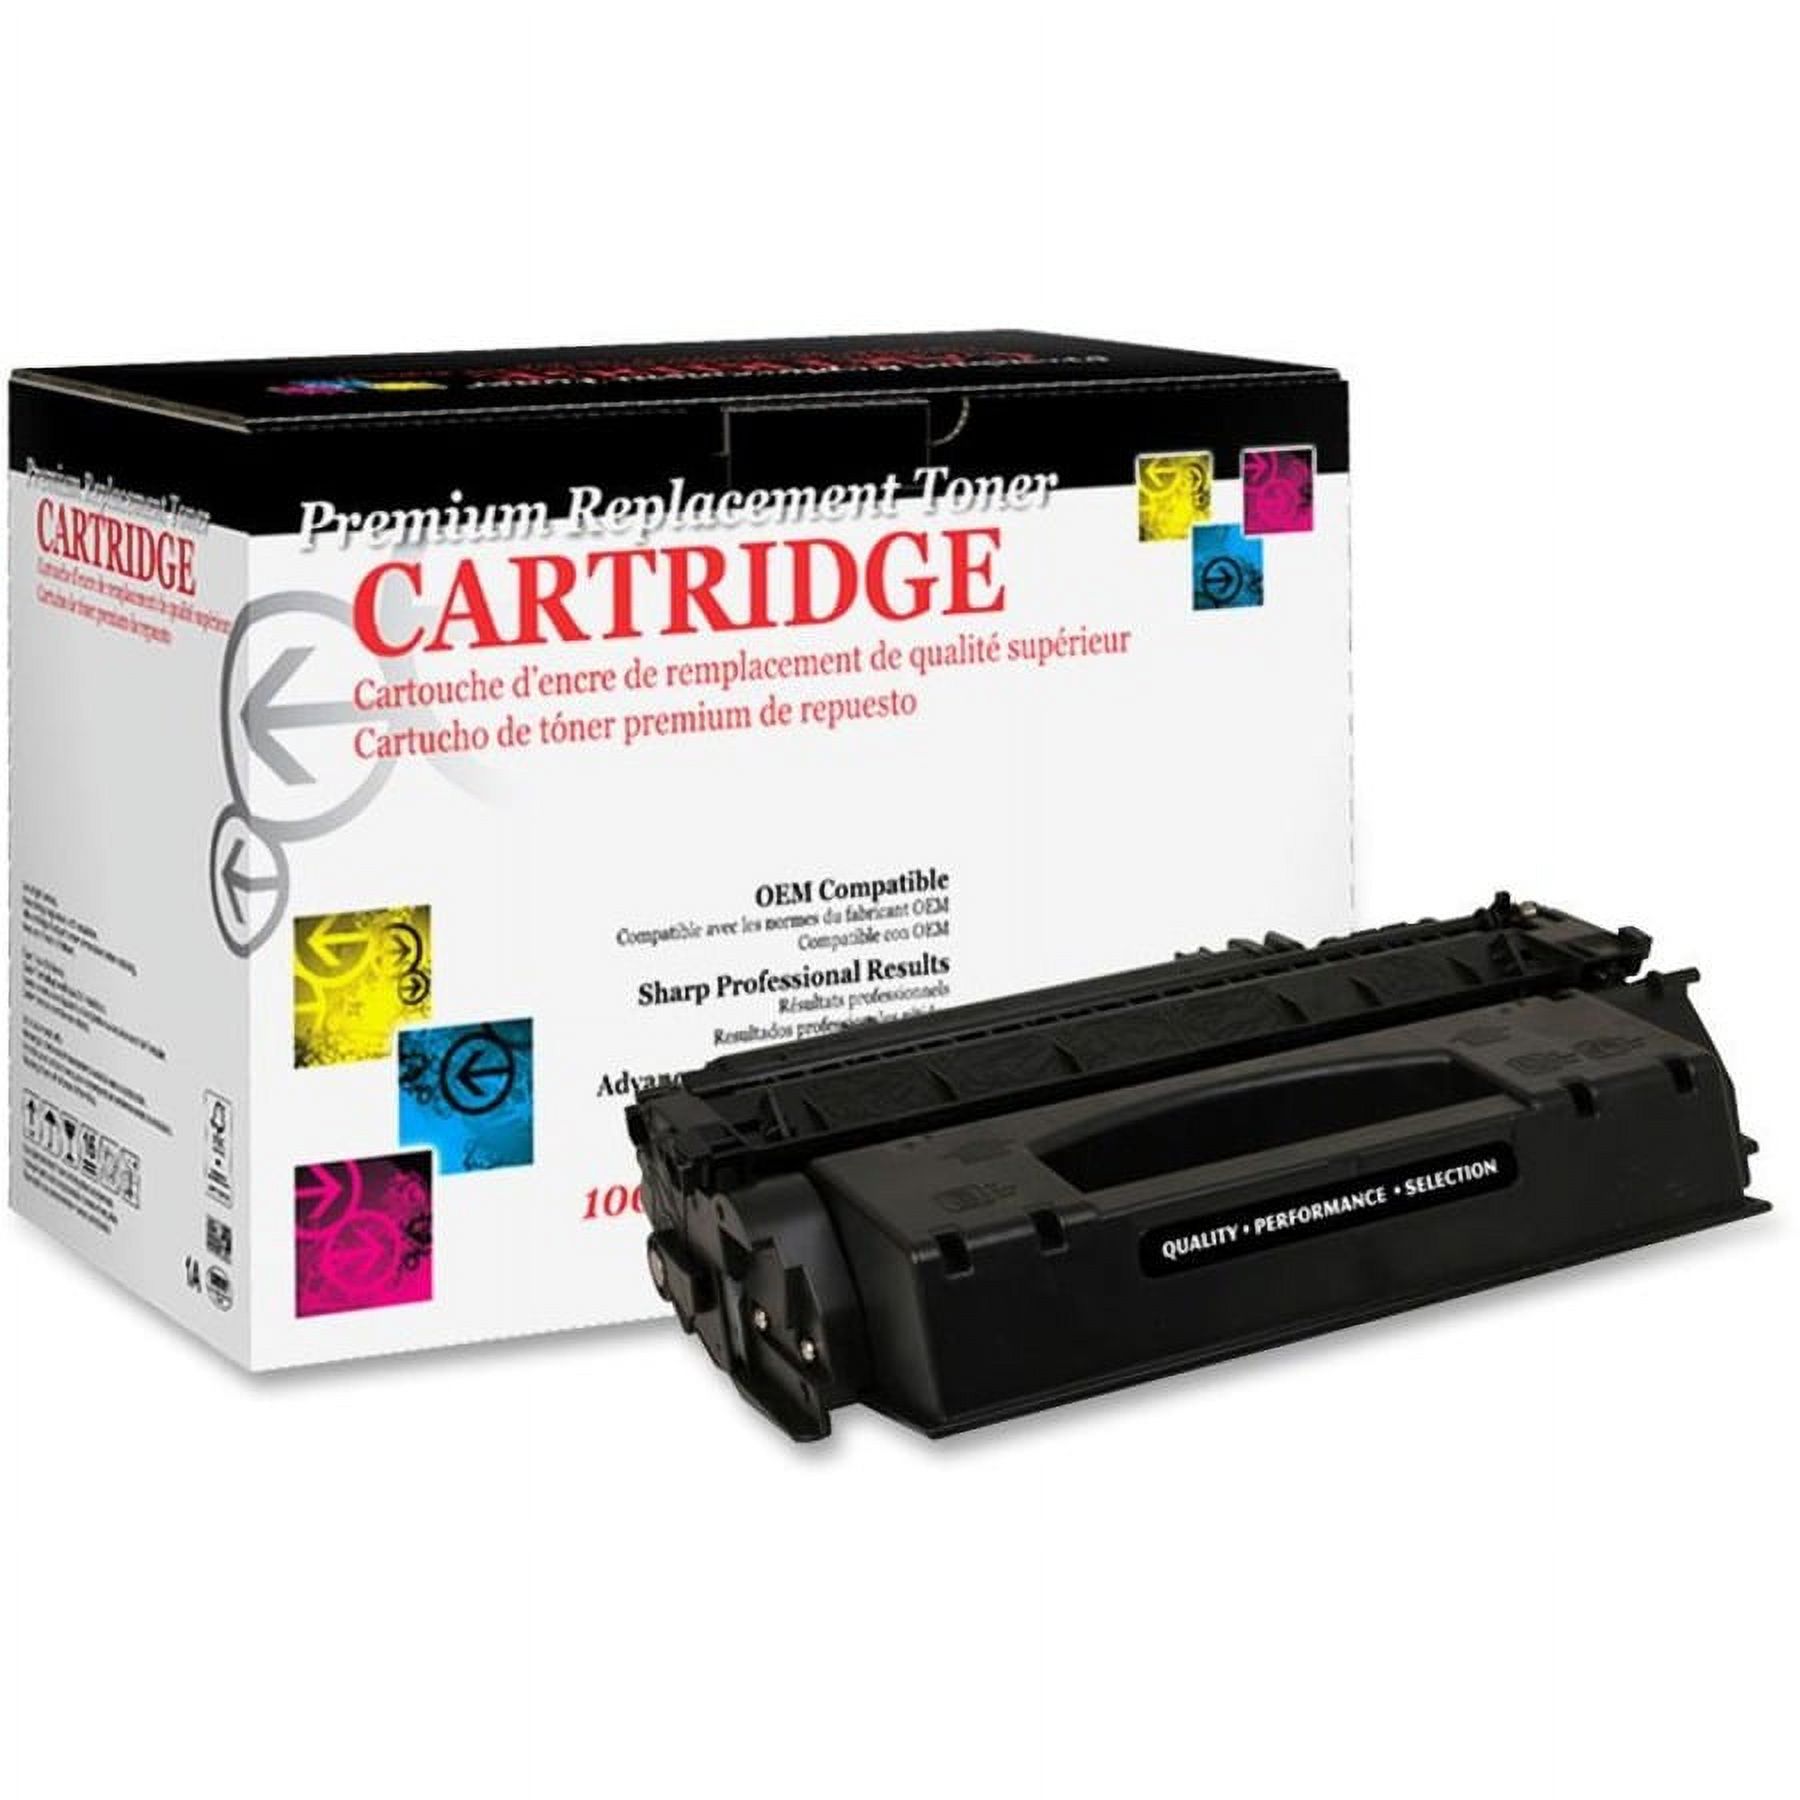 West Point, WPP200005P, . Replacmt HP 53A/53X Toner Cartridge, 1 Each - image 1 of 2